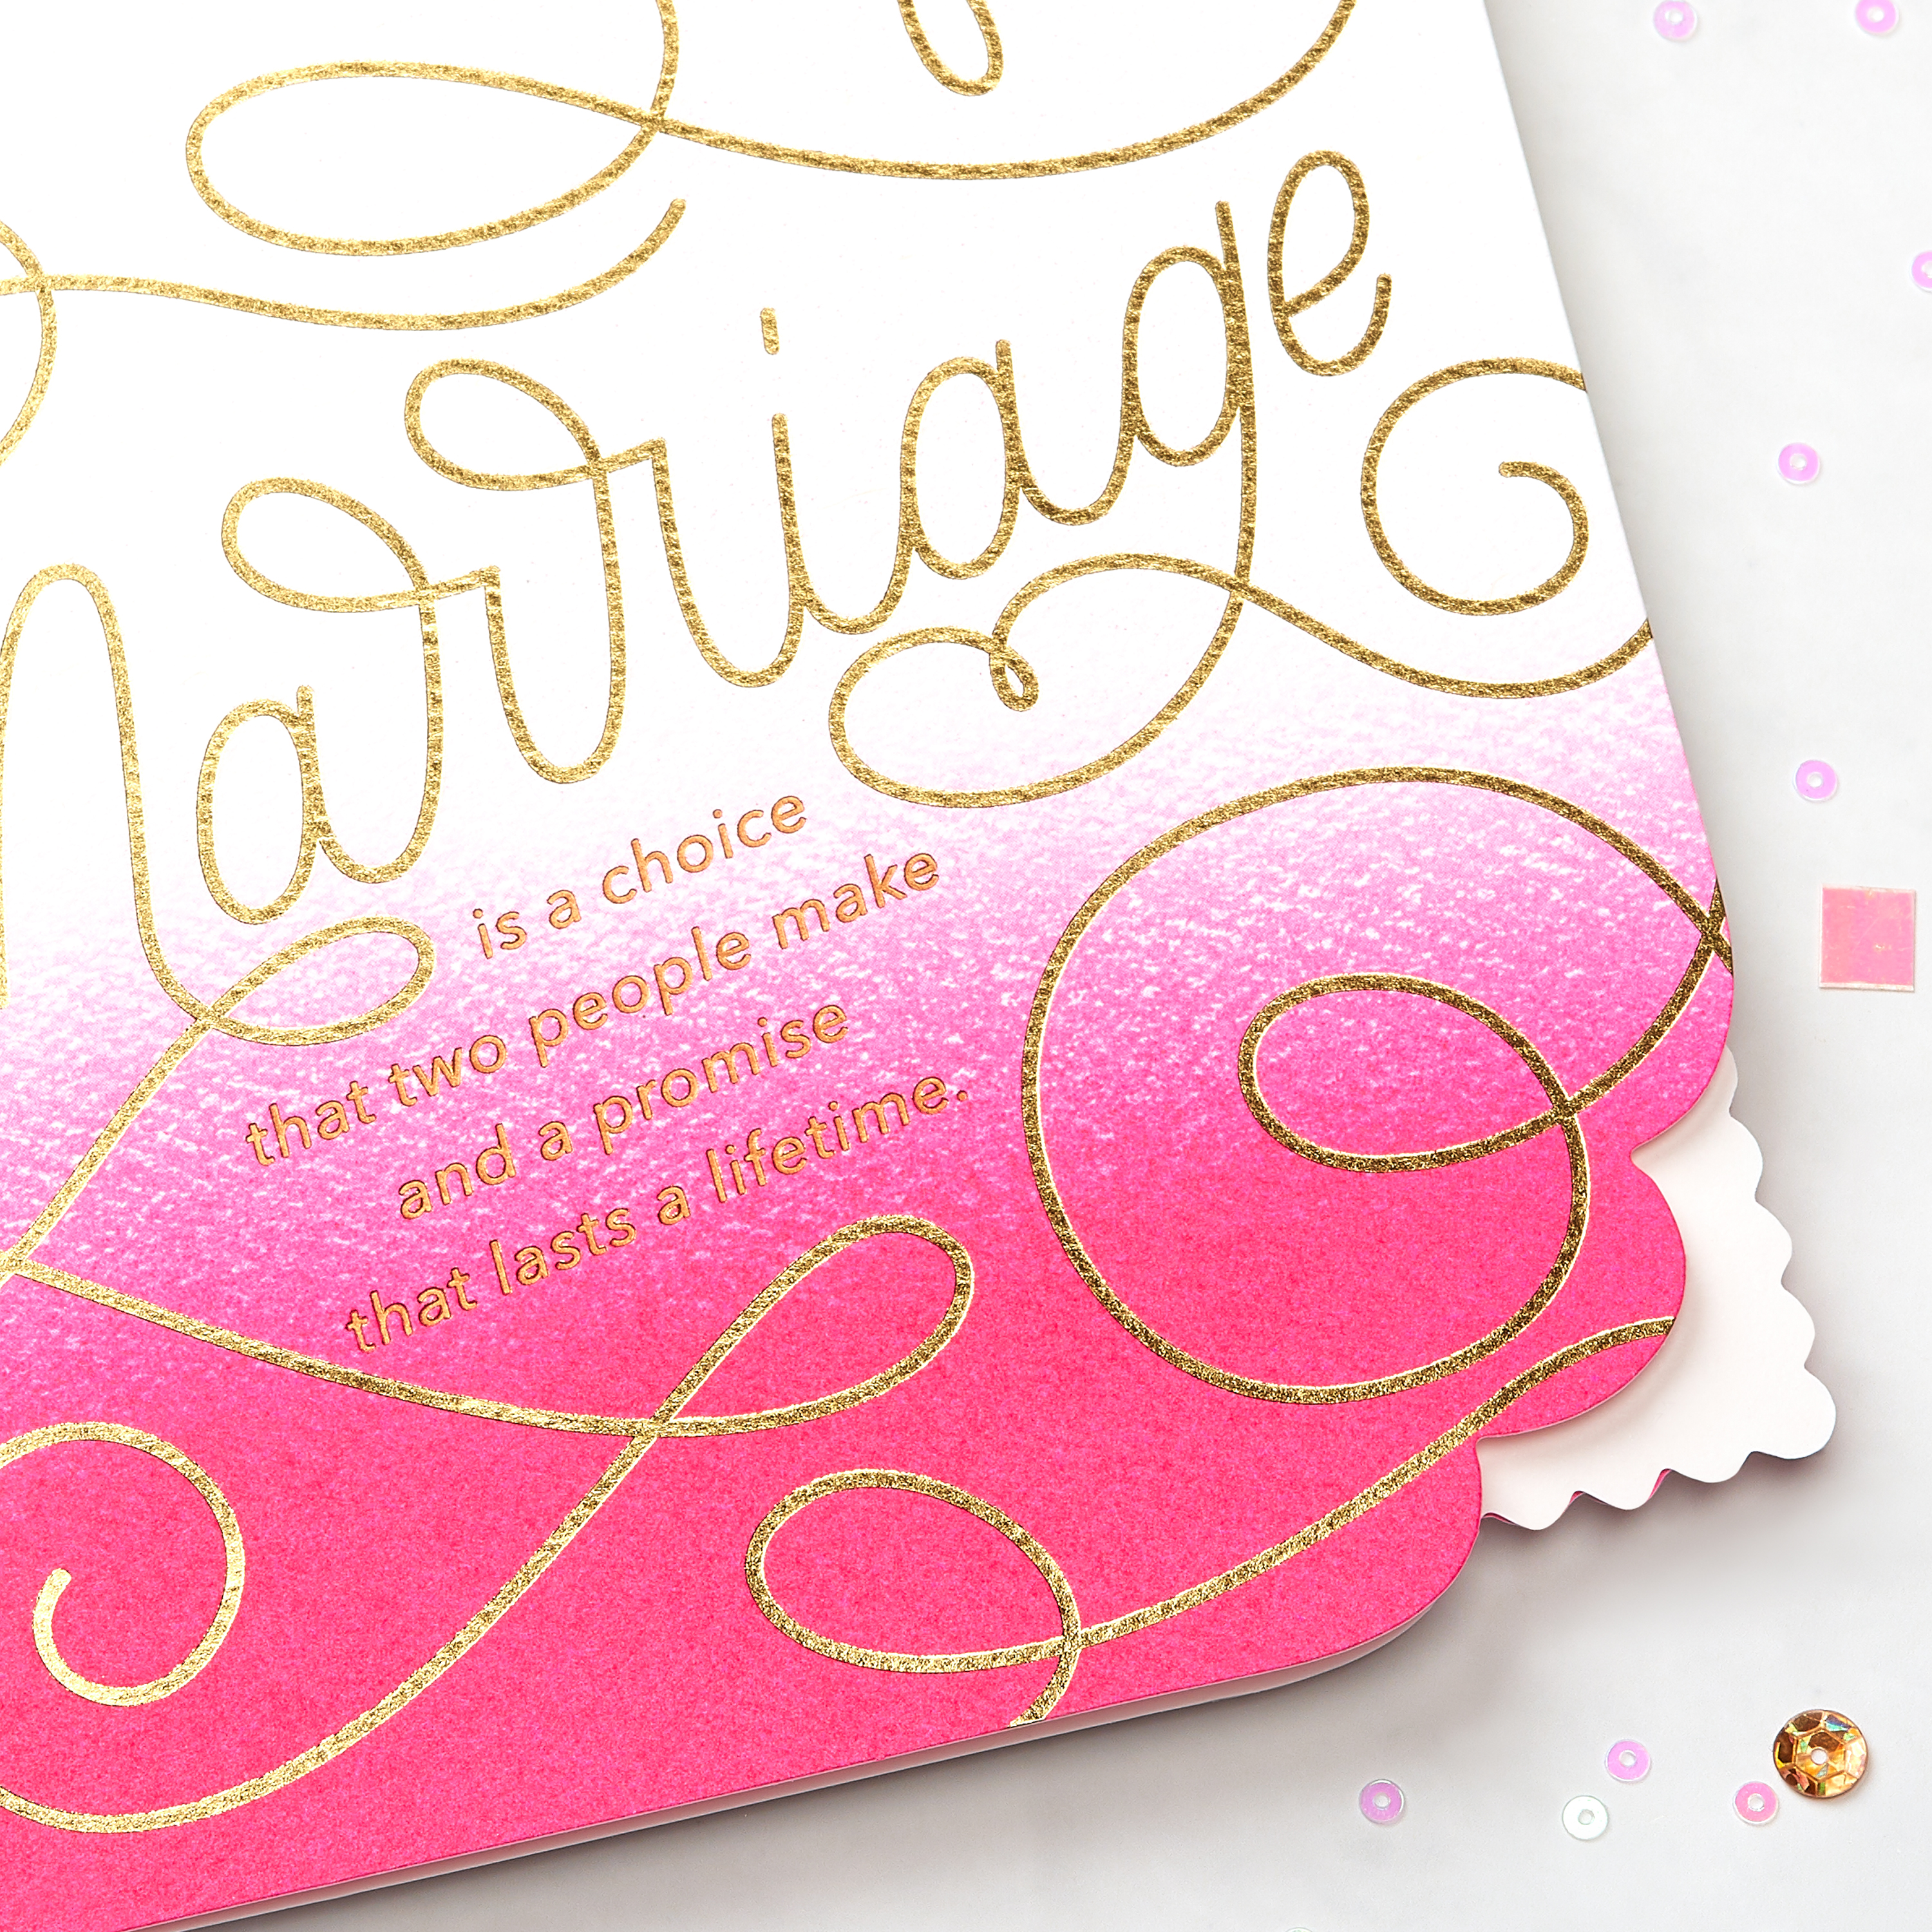 Marriage Greeting Card for Couple - Wedding, Anniversary image